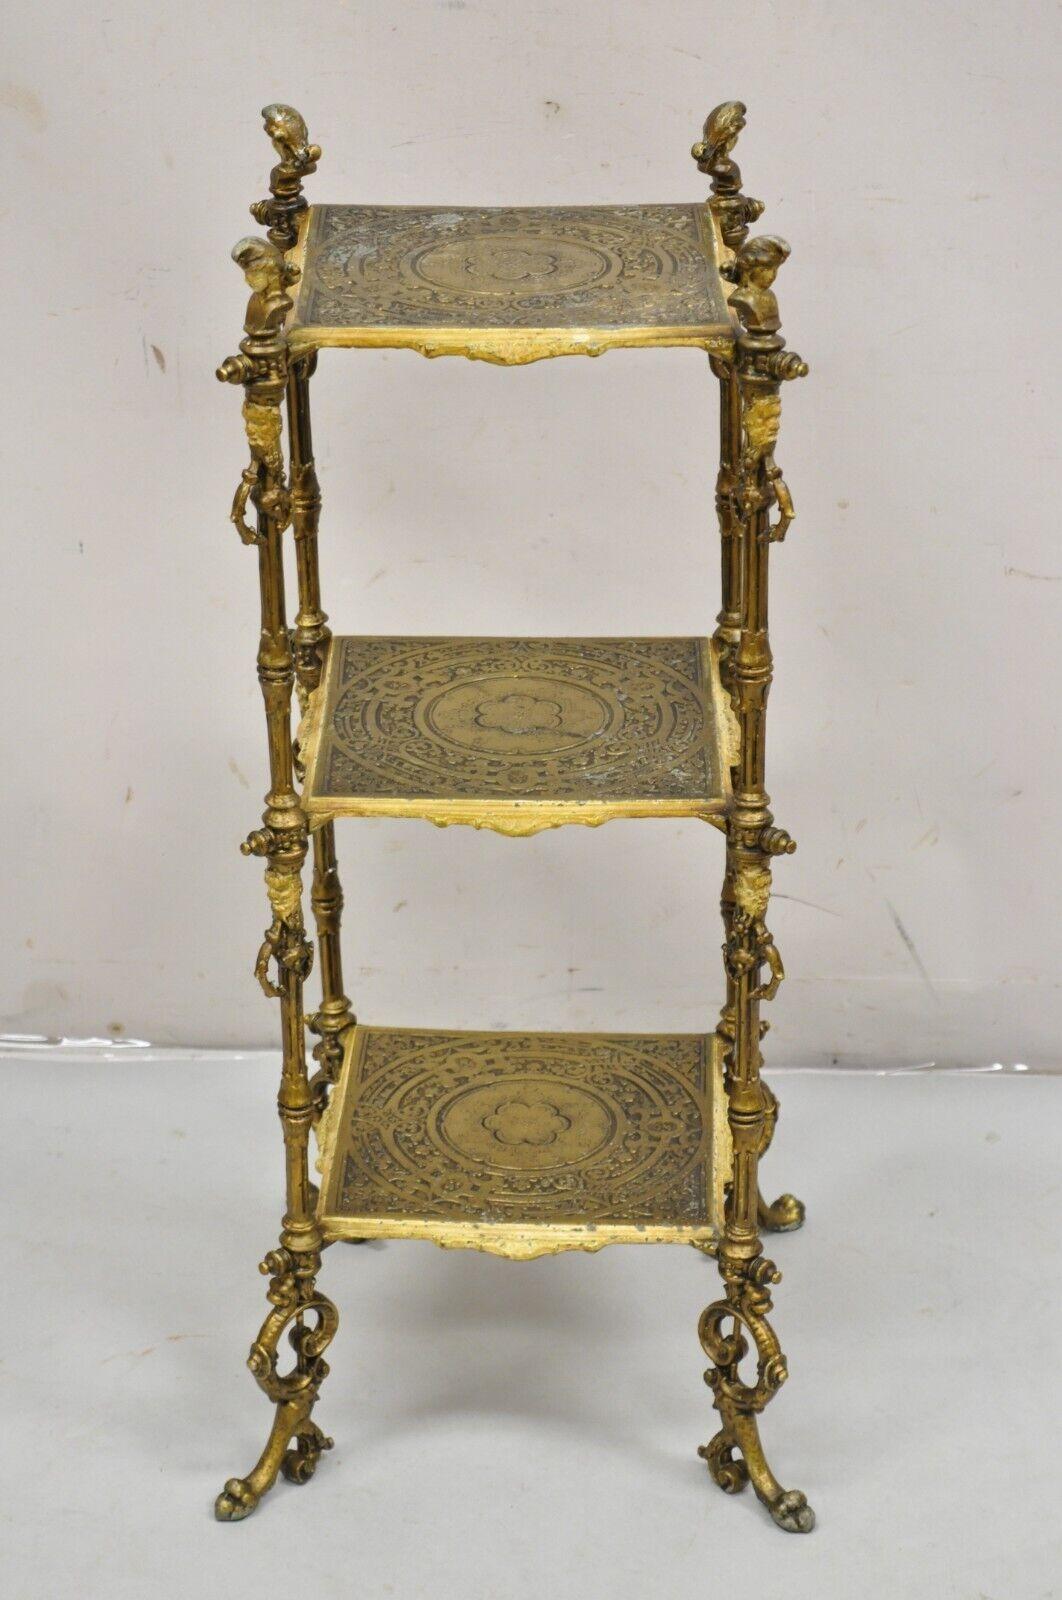 Antique French Victorian Bronze 2 Tier Onyx Stone Plant Stand Accent Table. Item features a bronze figural frame with male and female figures, 2 oval onyx stone surfaces with onyx finials, very nice antique table. Circa 19th Century. Measurements: